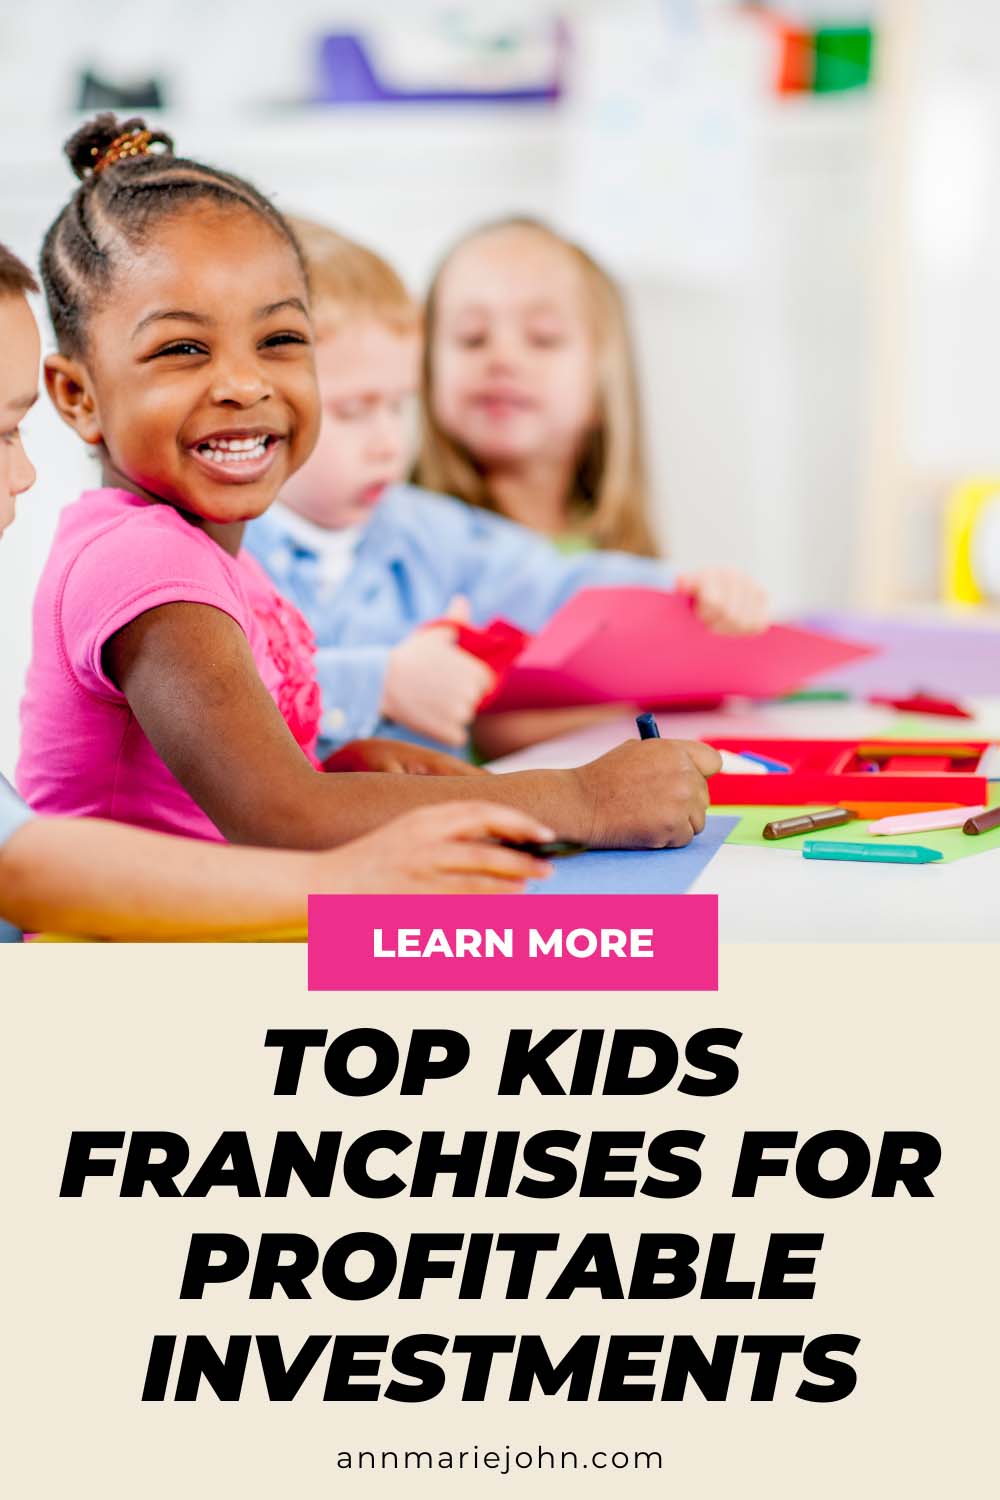 Top Kids Franchises for Profitable Investments